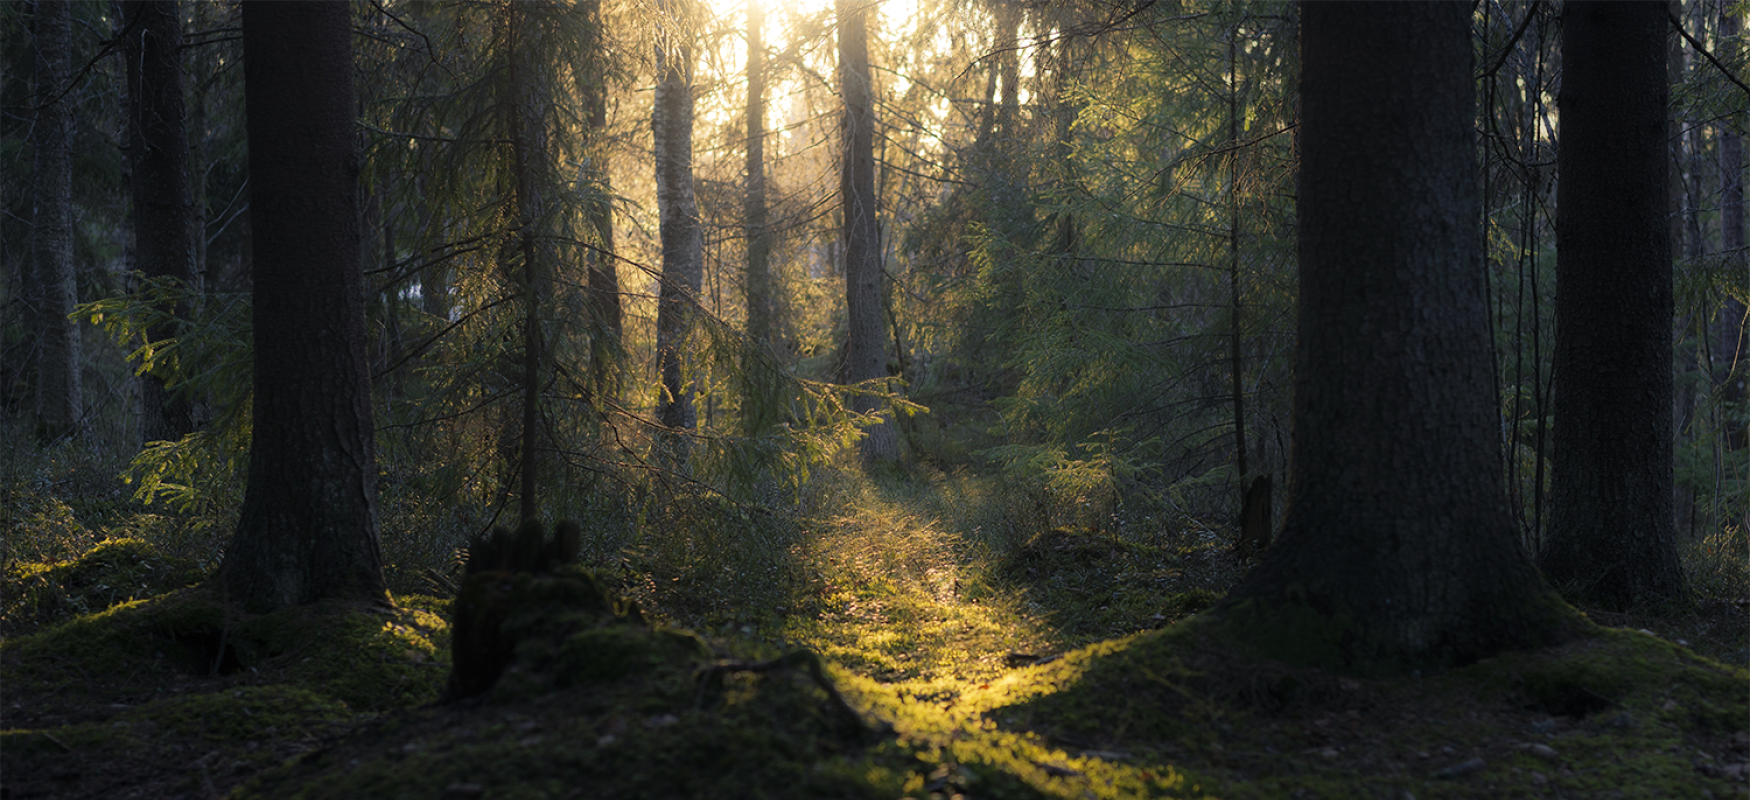 Forest in Finland with the sun shining through the trees